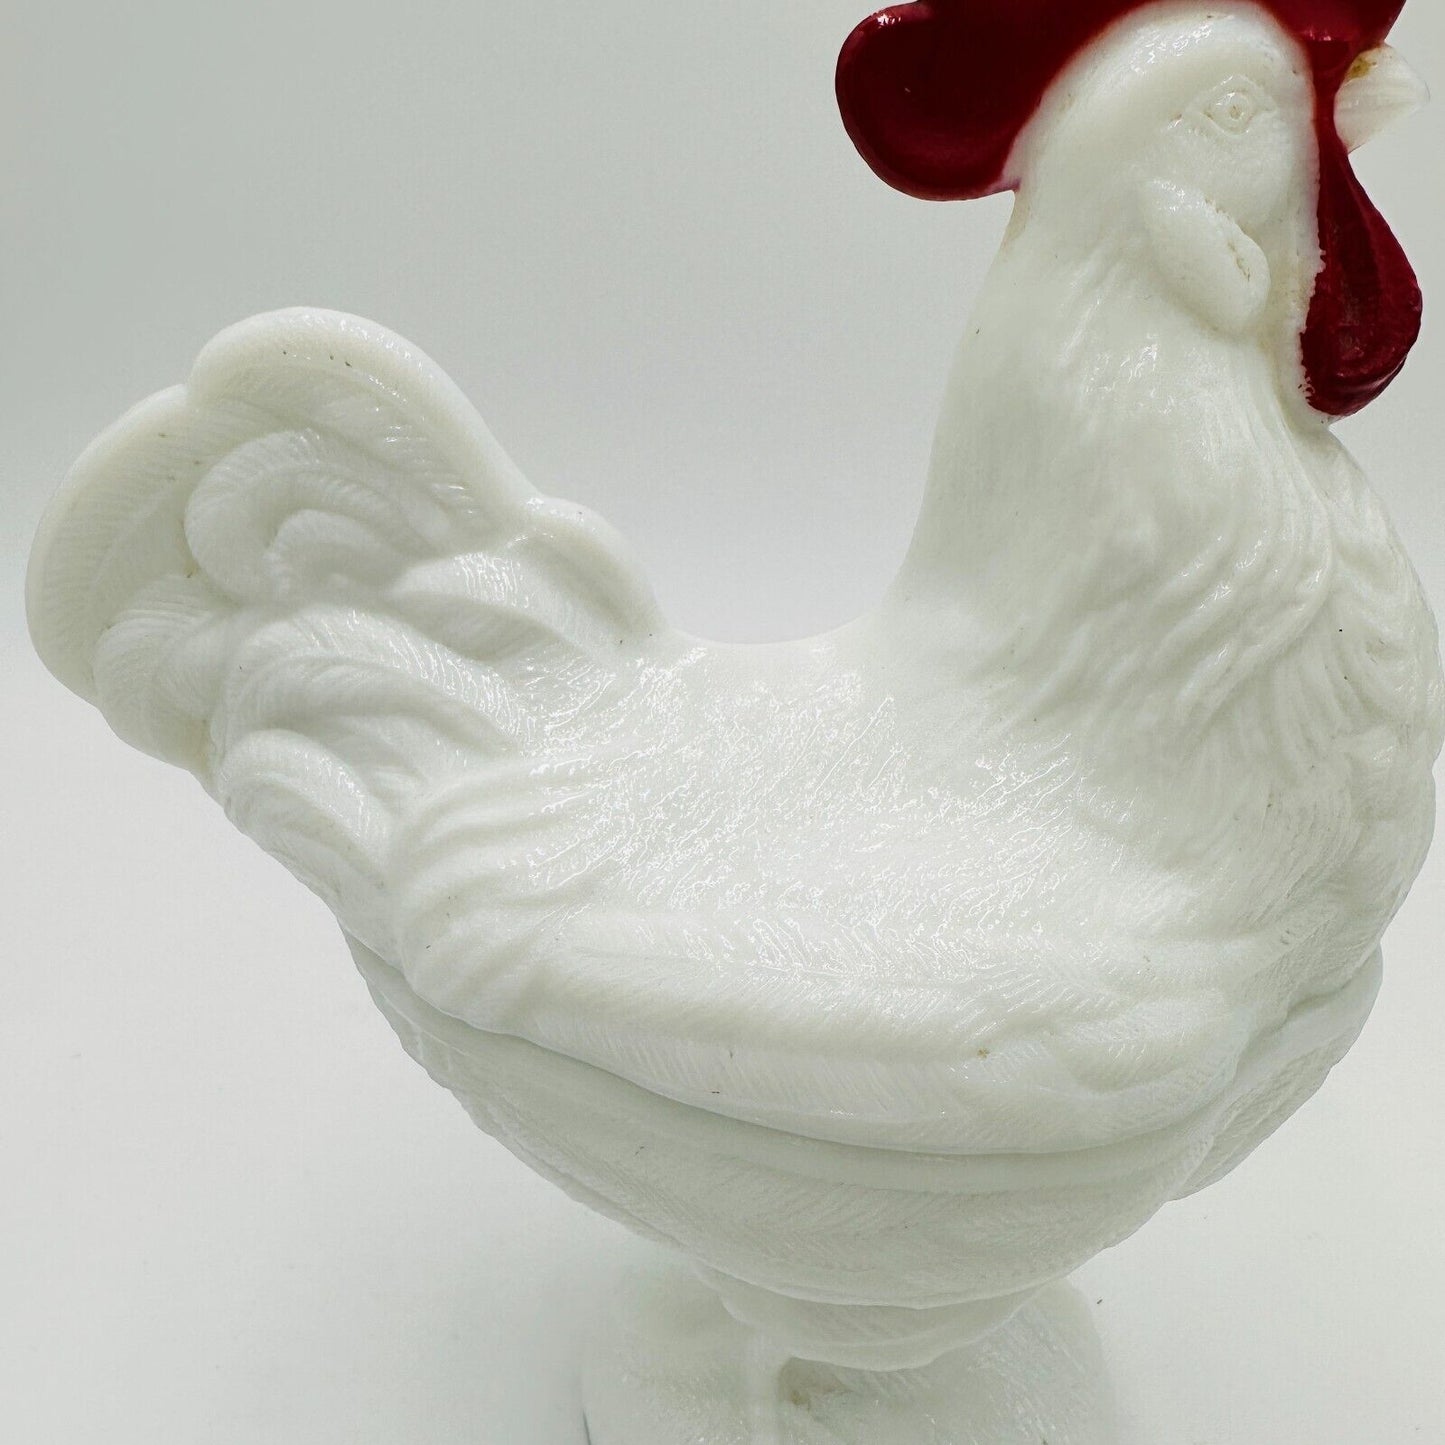 Westmoreland Rooster Milk Glass 2 Pieces Lid Candy Dish Home Decor Large